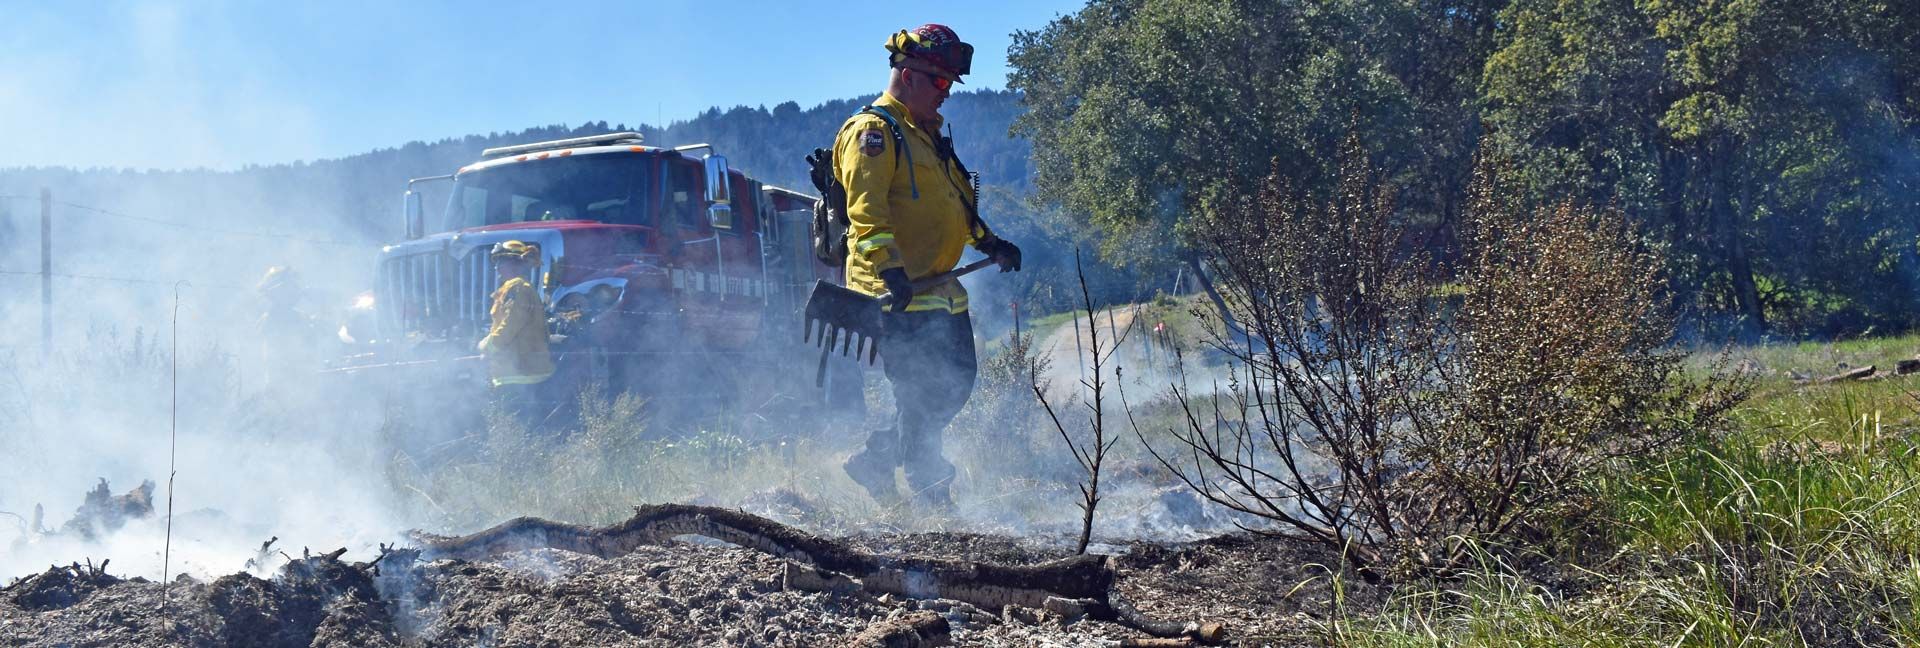 firefighters mopping up grass wildfire